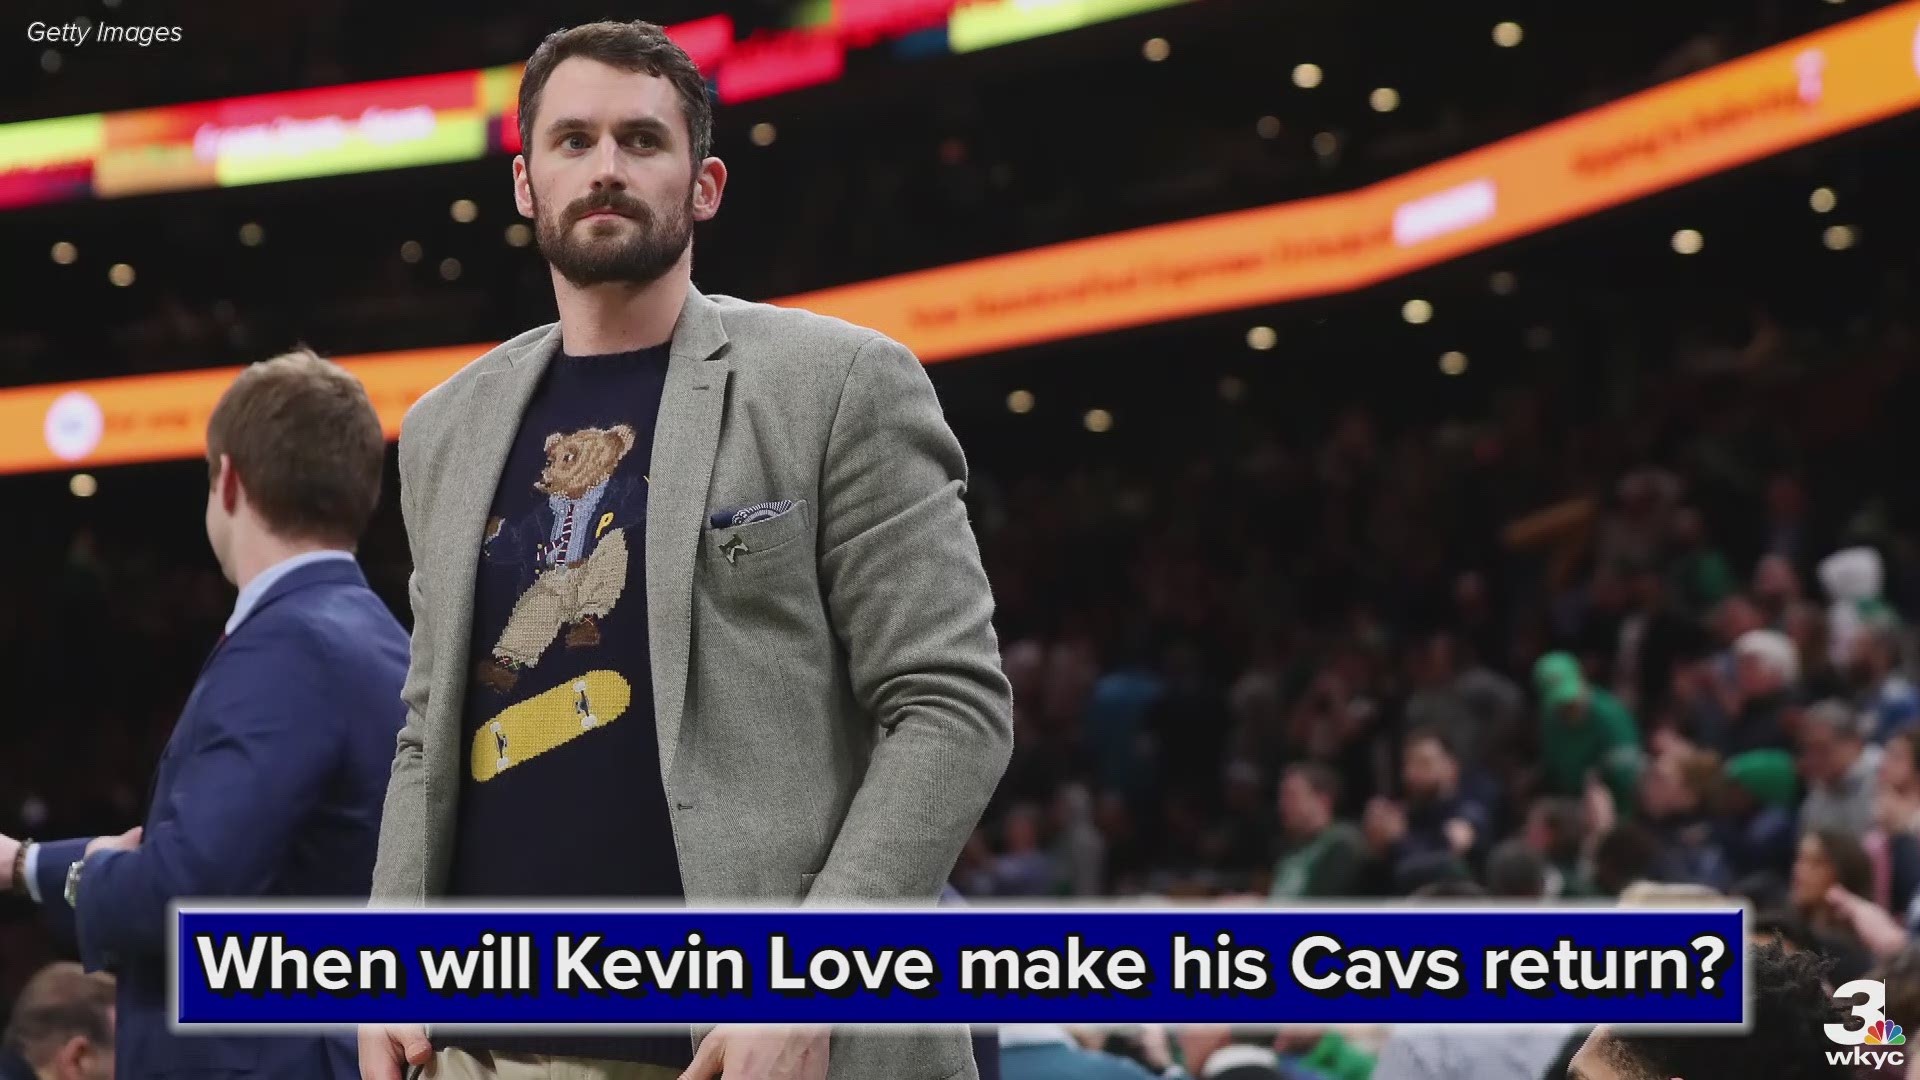 On Thursday, Kevin Love went through his first 5-on-5 practice with the Cleveland Cavaliers since undergoing toe surgery.